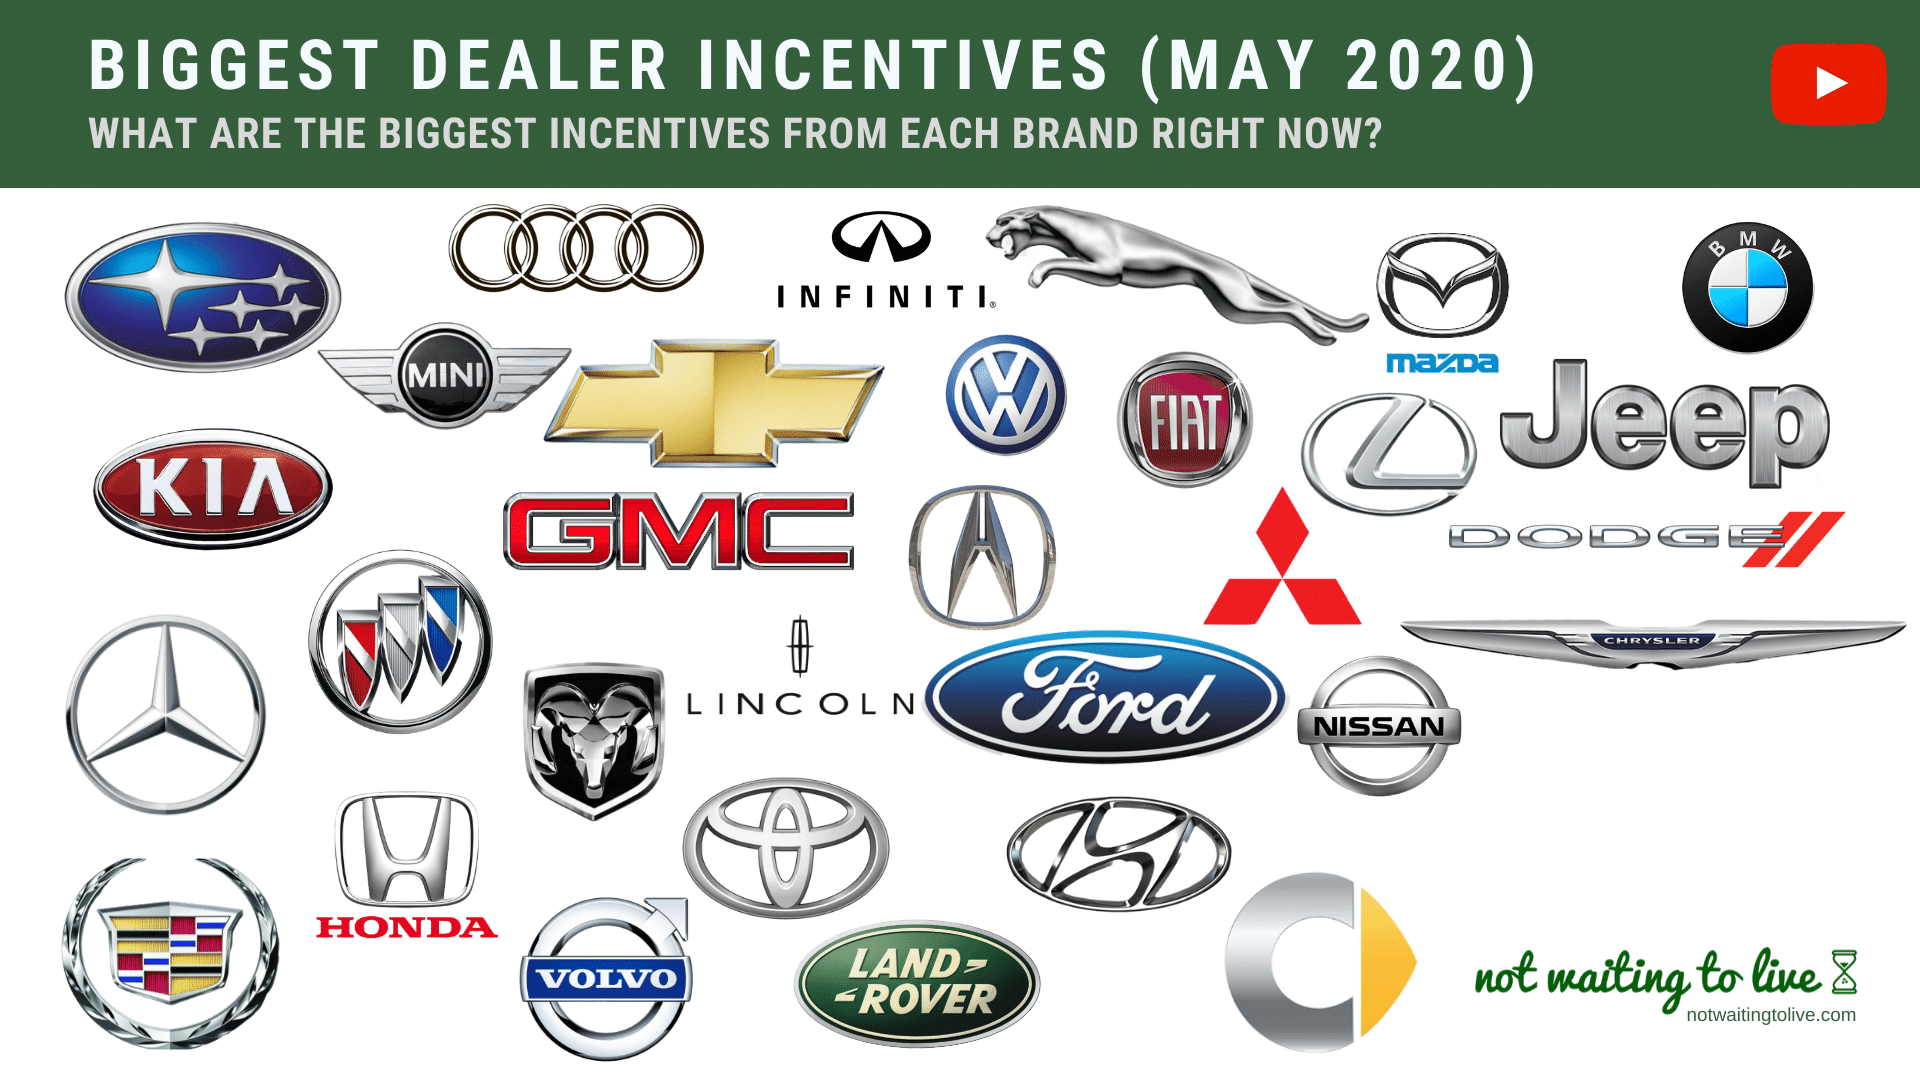 Biggest New Car Price Dealer Incentives for May 2020 (Have Coronavirus